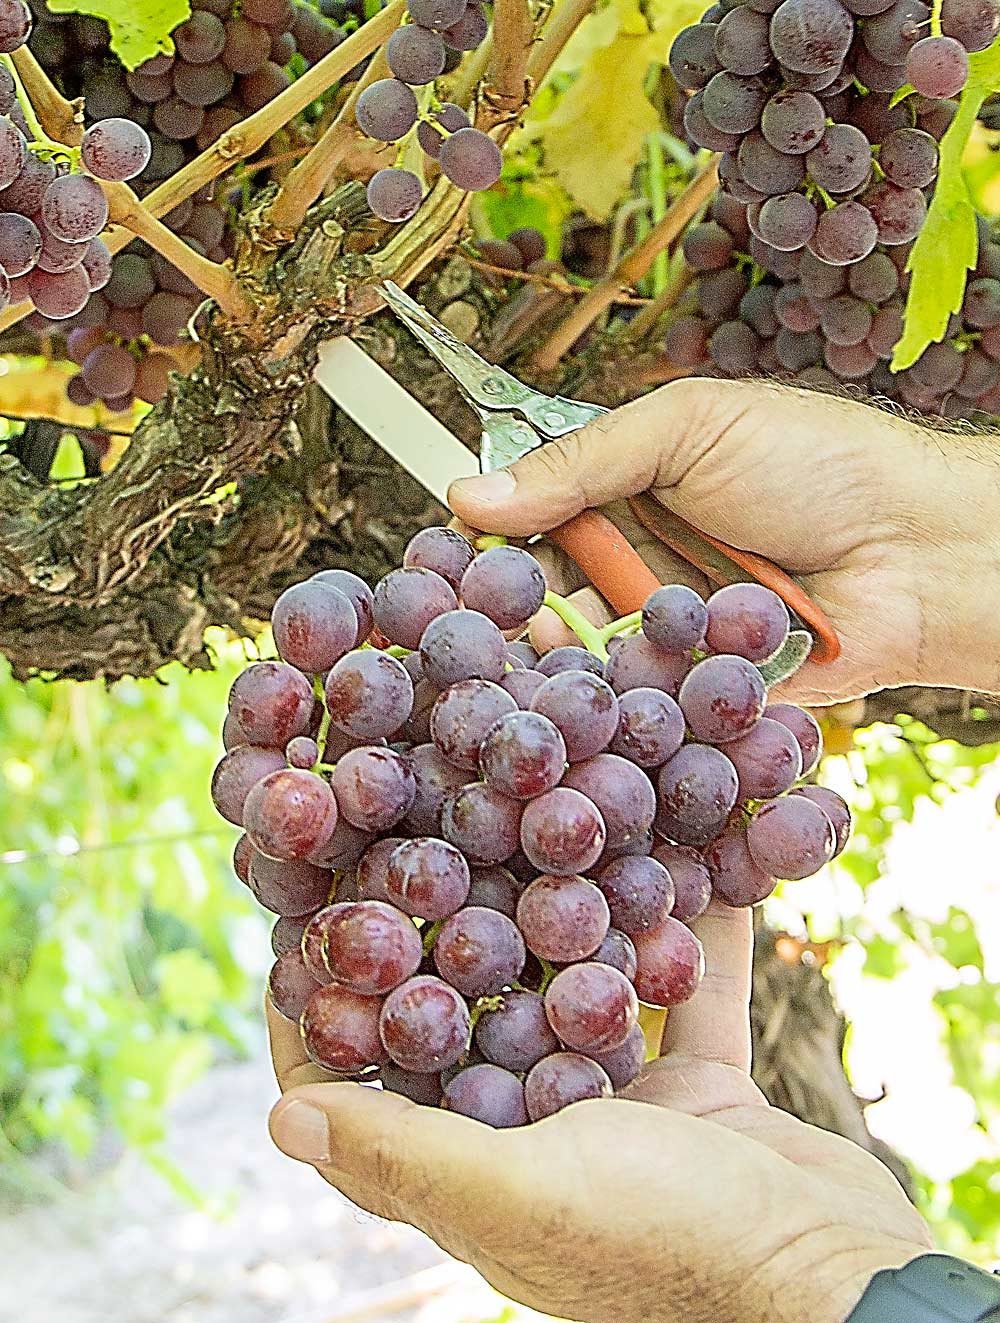 Alborz, one of the dominant cultivars to emerge from Fallahi’s table grape trials in the Intermountain West, harvests in September. Though California grapes obviously dominate the market, the later harvest window in Idaho offers a market opportunity, Fallahi said. (Kate Prengaman/Good Fruit Grower)